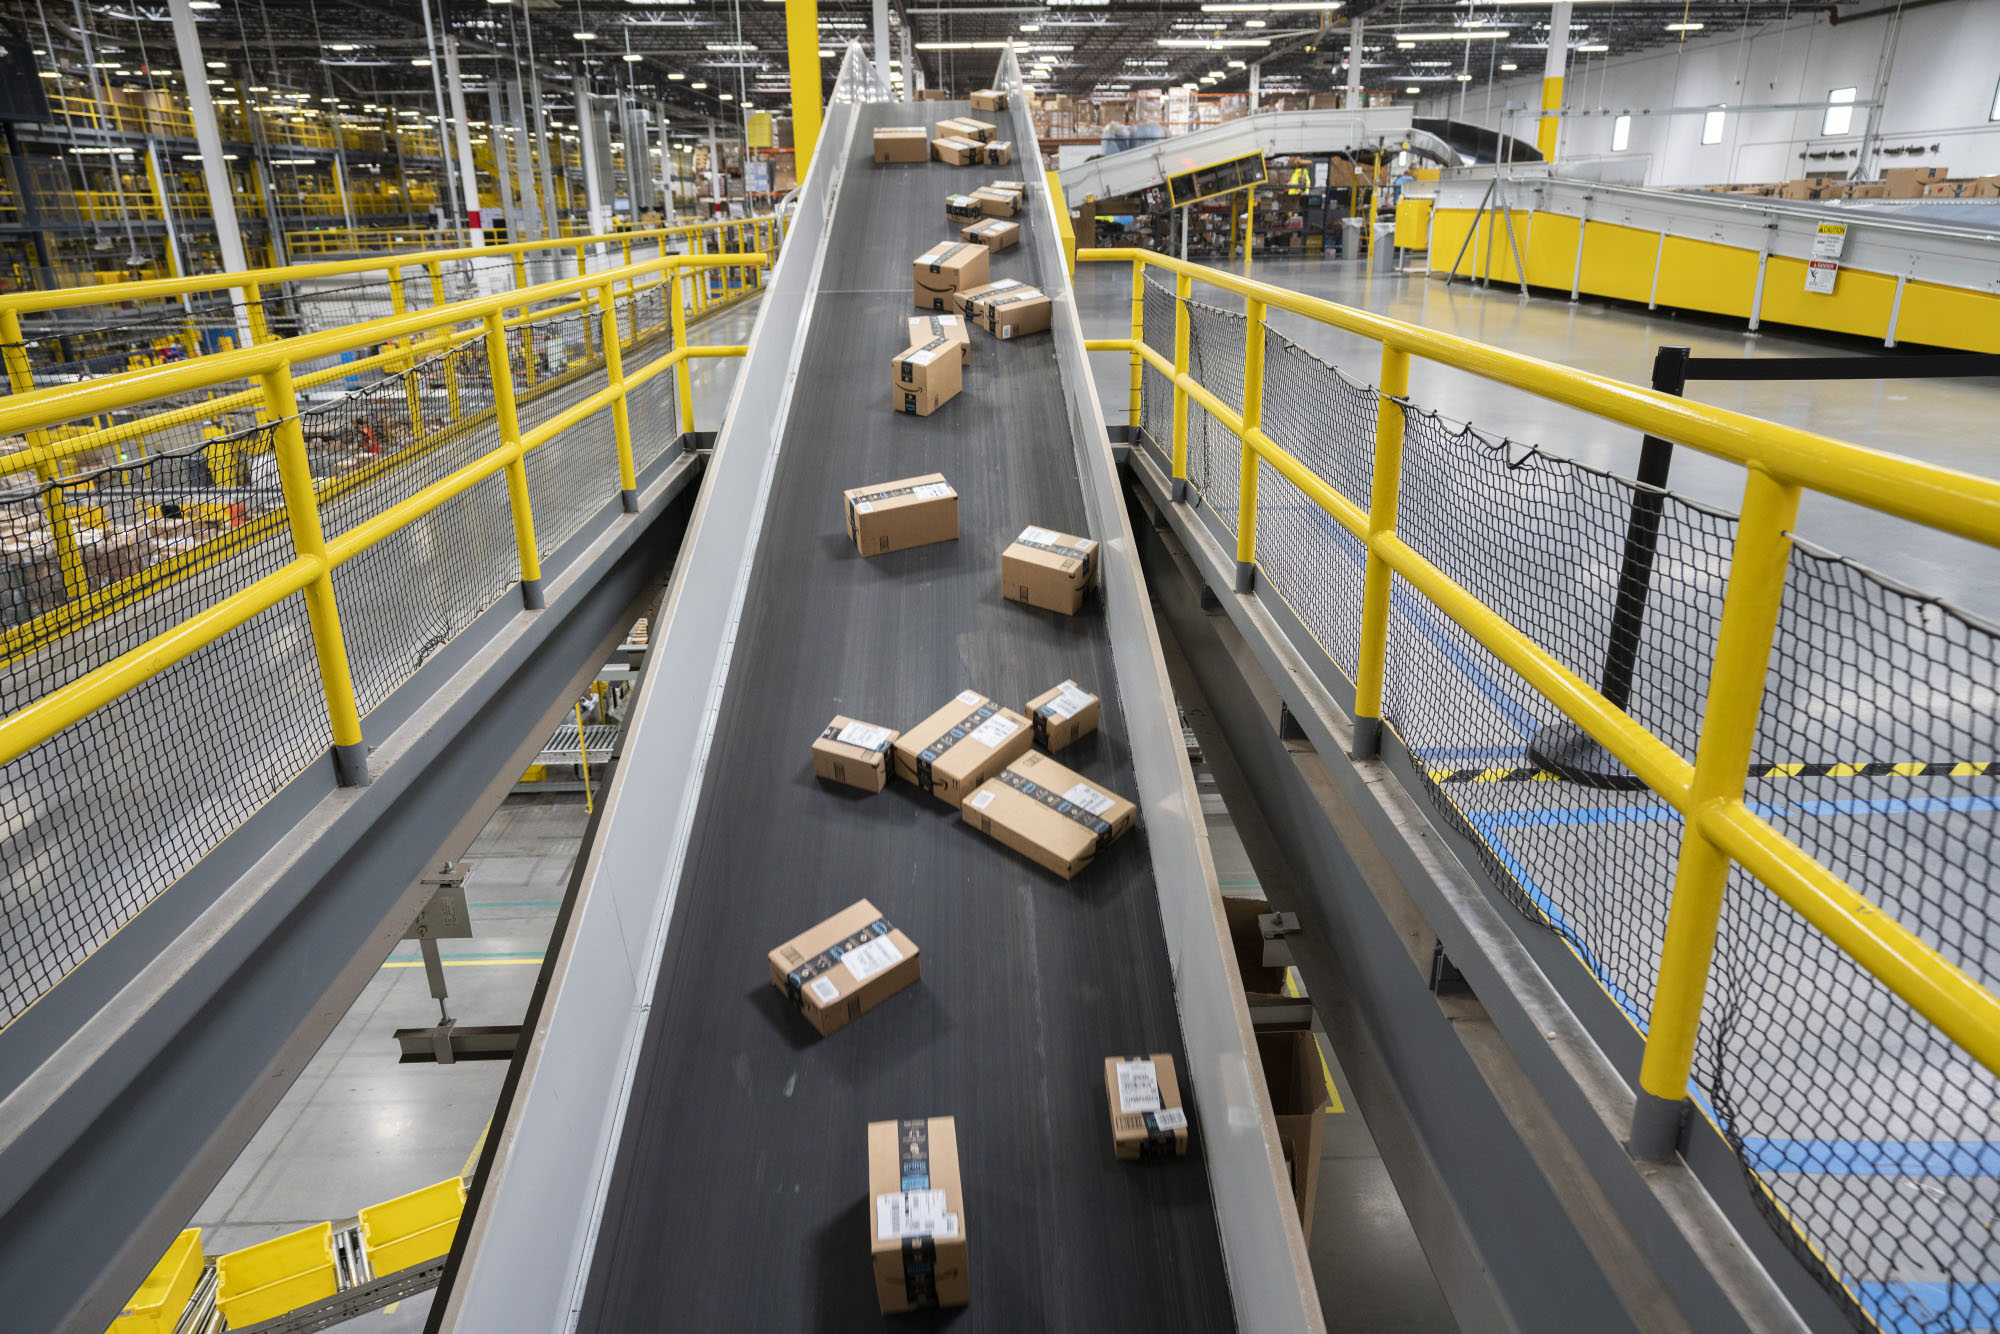 Packages are sorted at an Amazon.com Inc. fulfillment center in Baltimore. | BLOOMBERG